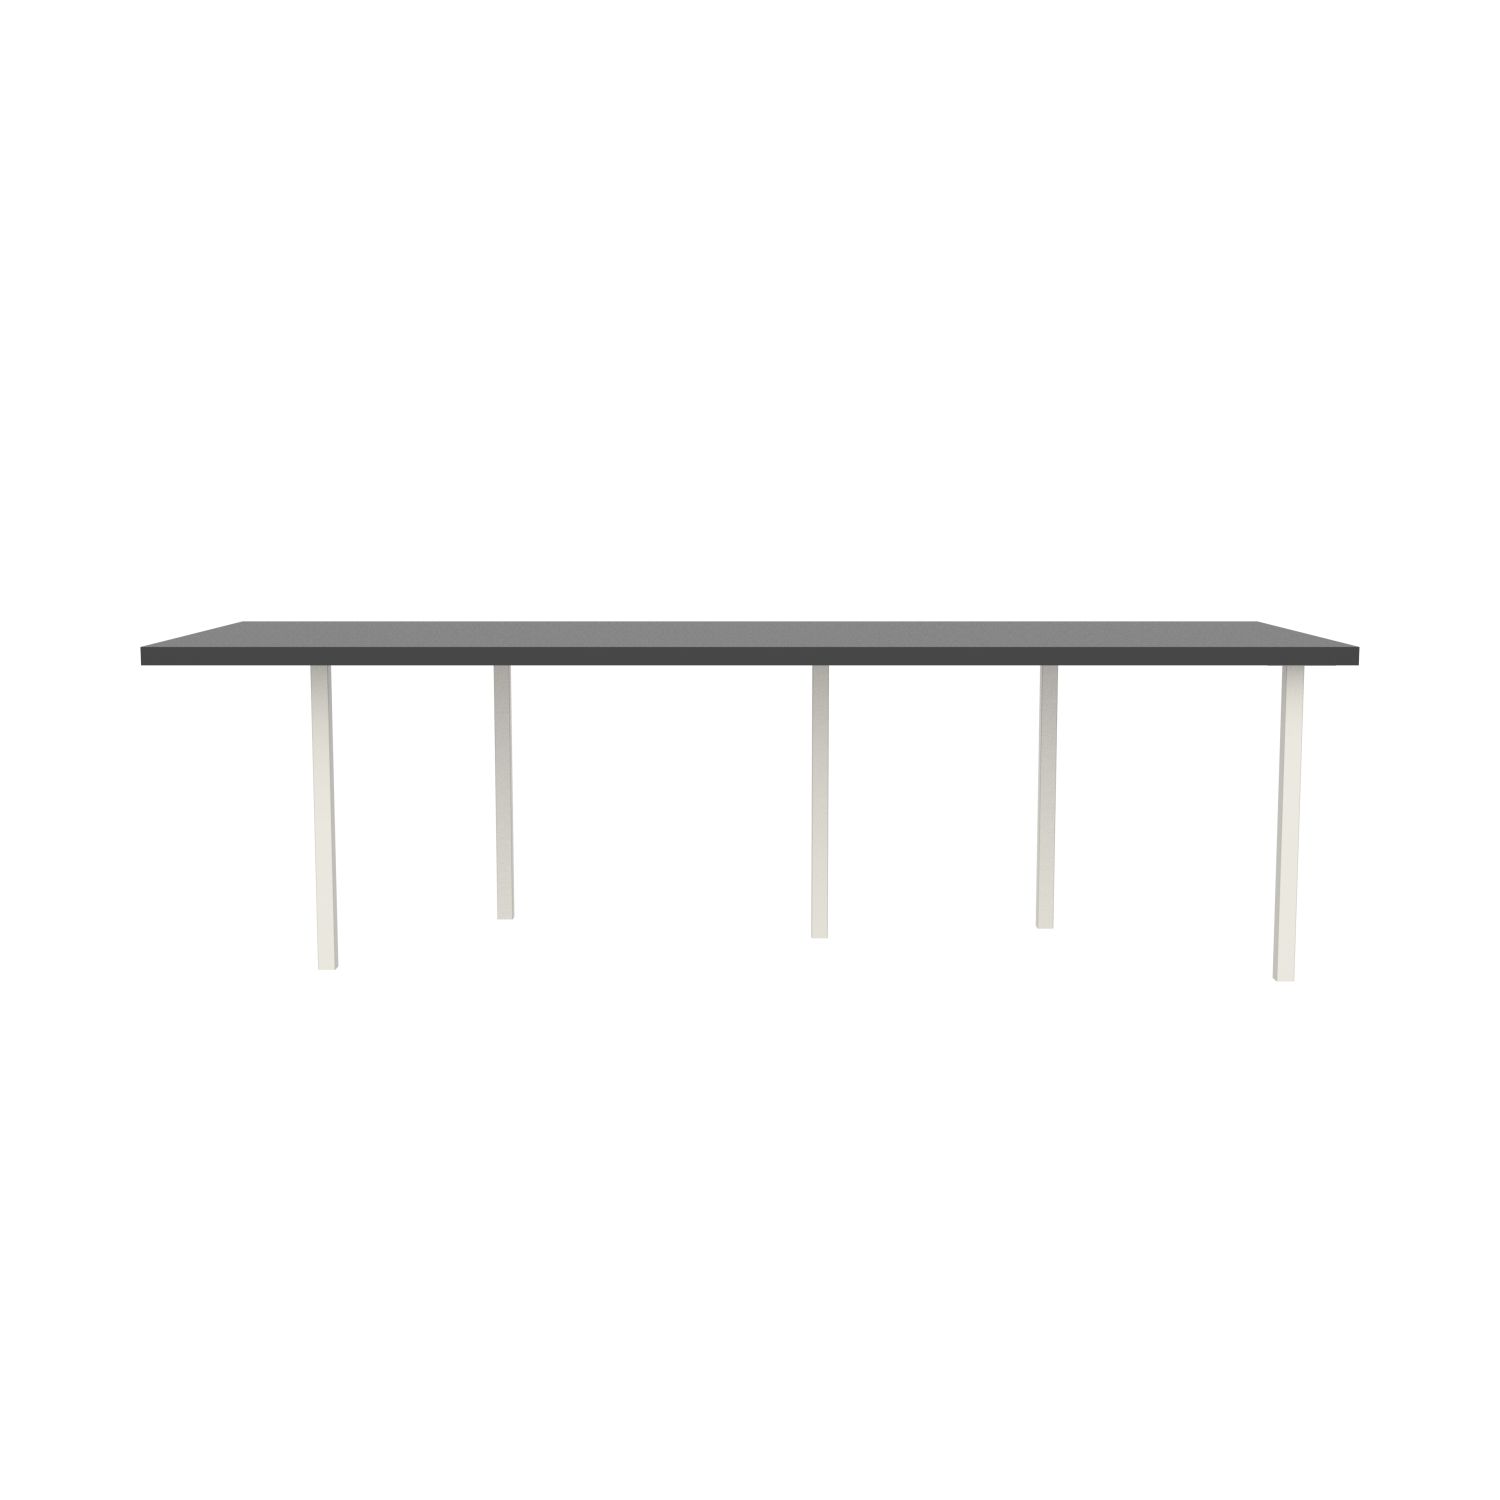 lensvelt bbrand table five fixed heigt 915x264 hpl black 50 mm price level 1 white ral9010